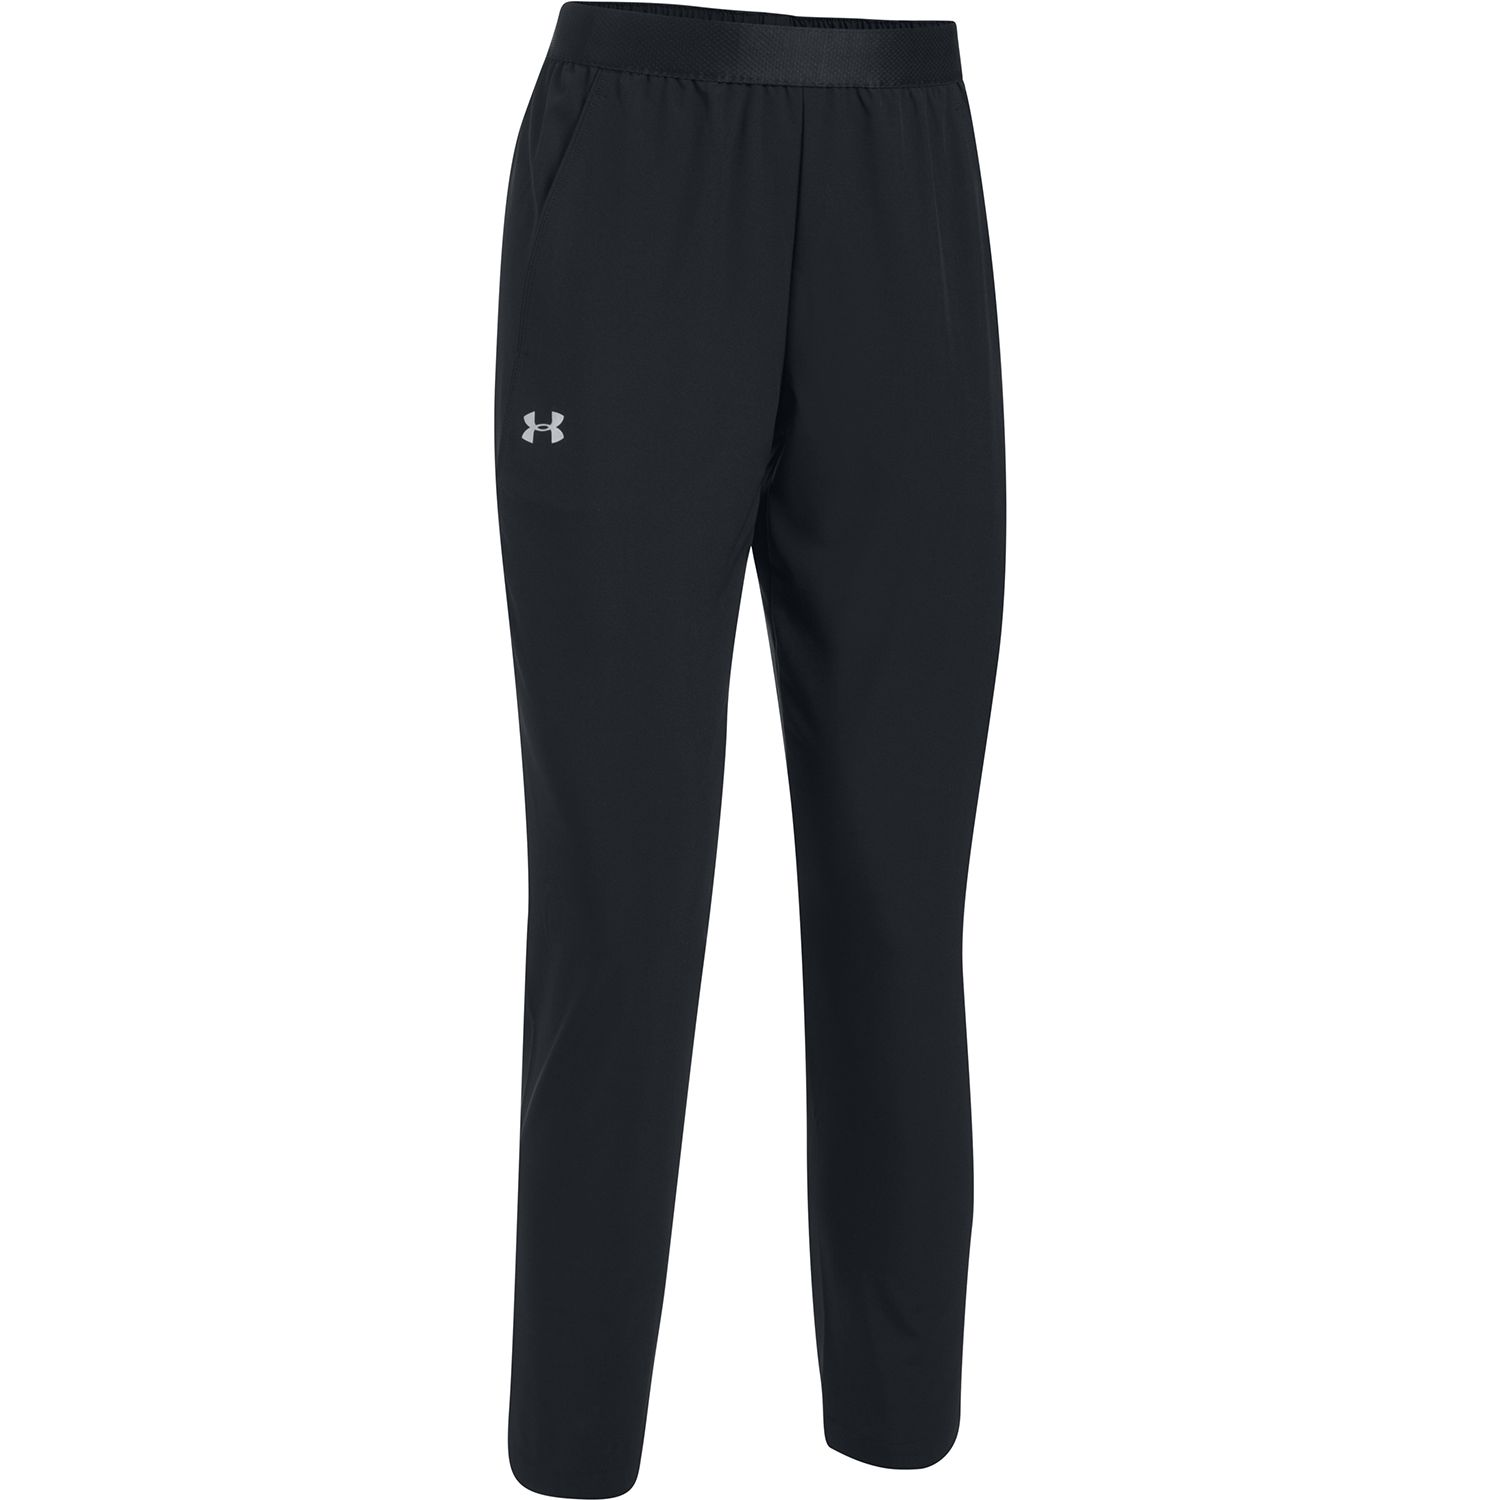 Women's Under Armour Tapered Traveler Pants